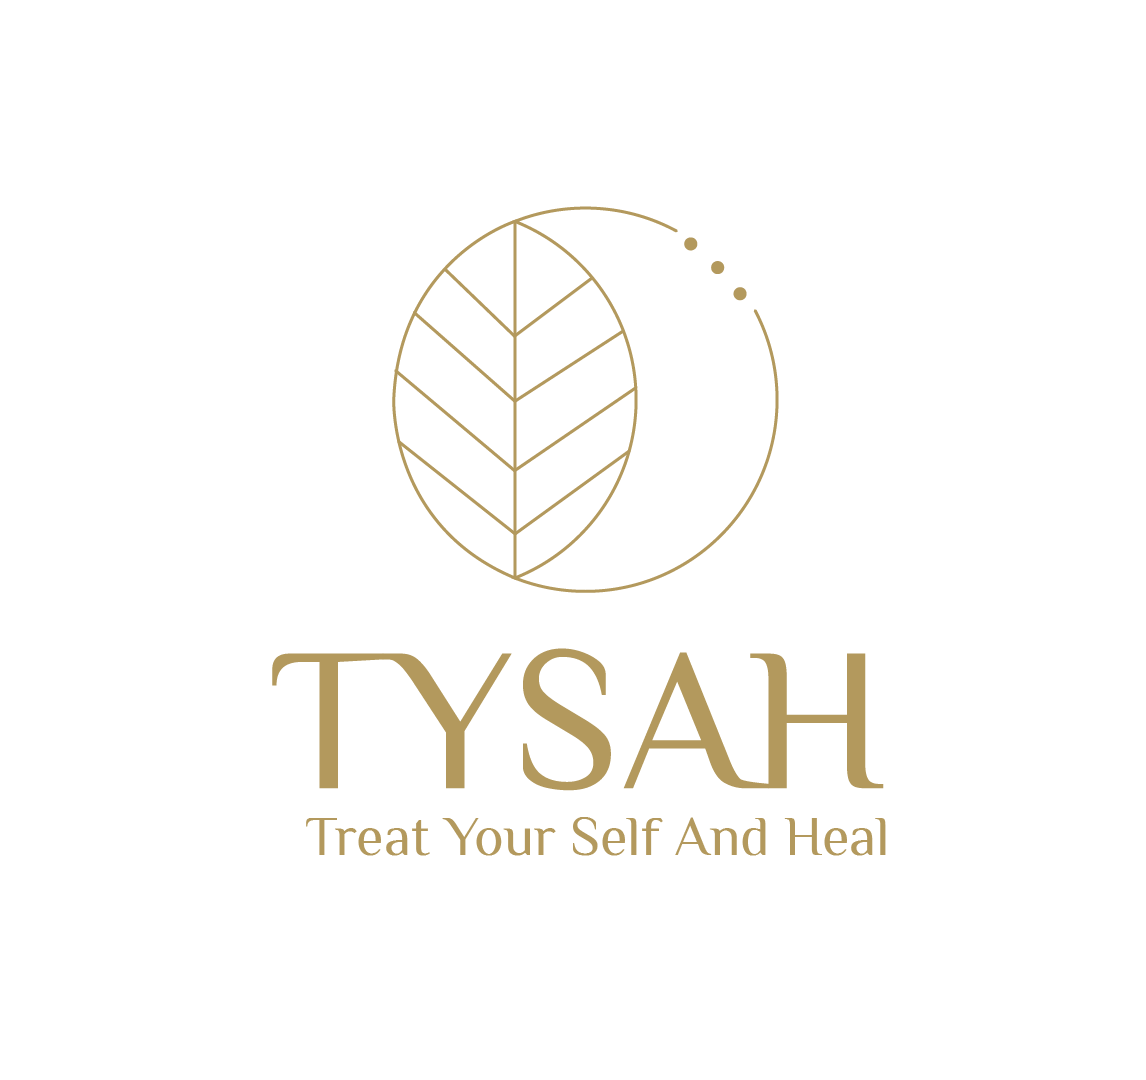 TYSAH, stands for Treat Your Self And Heal